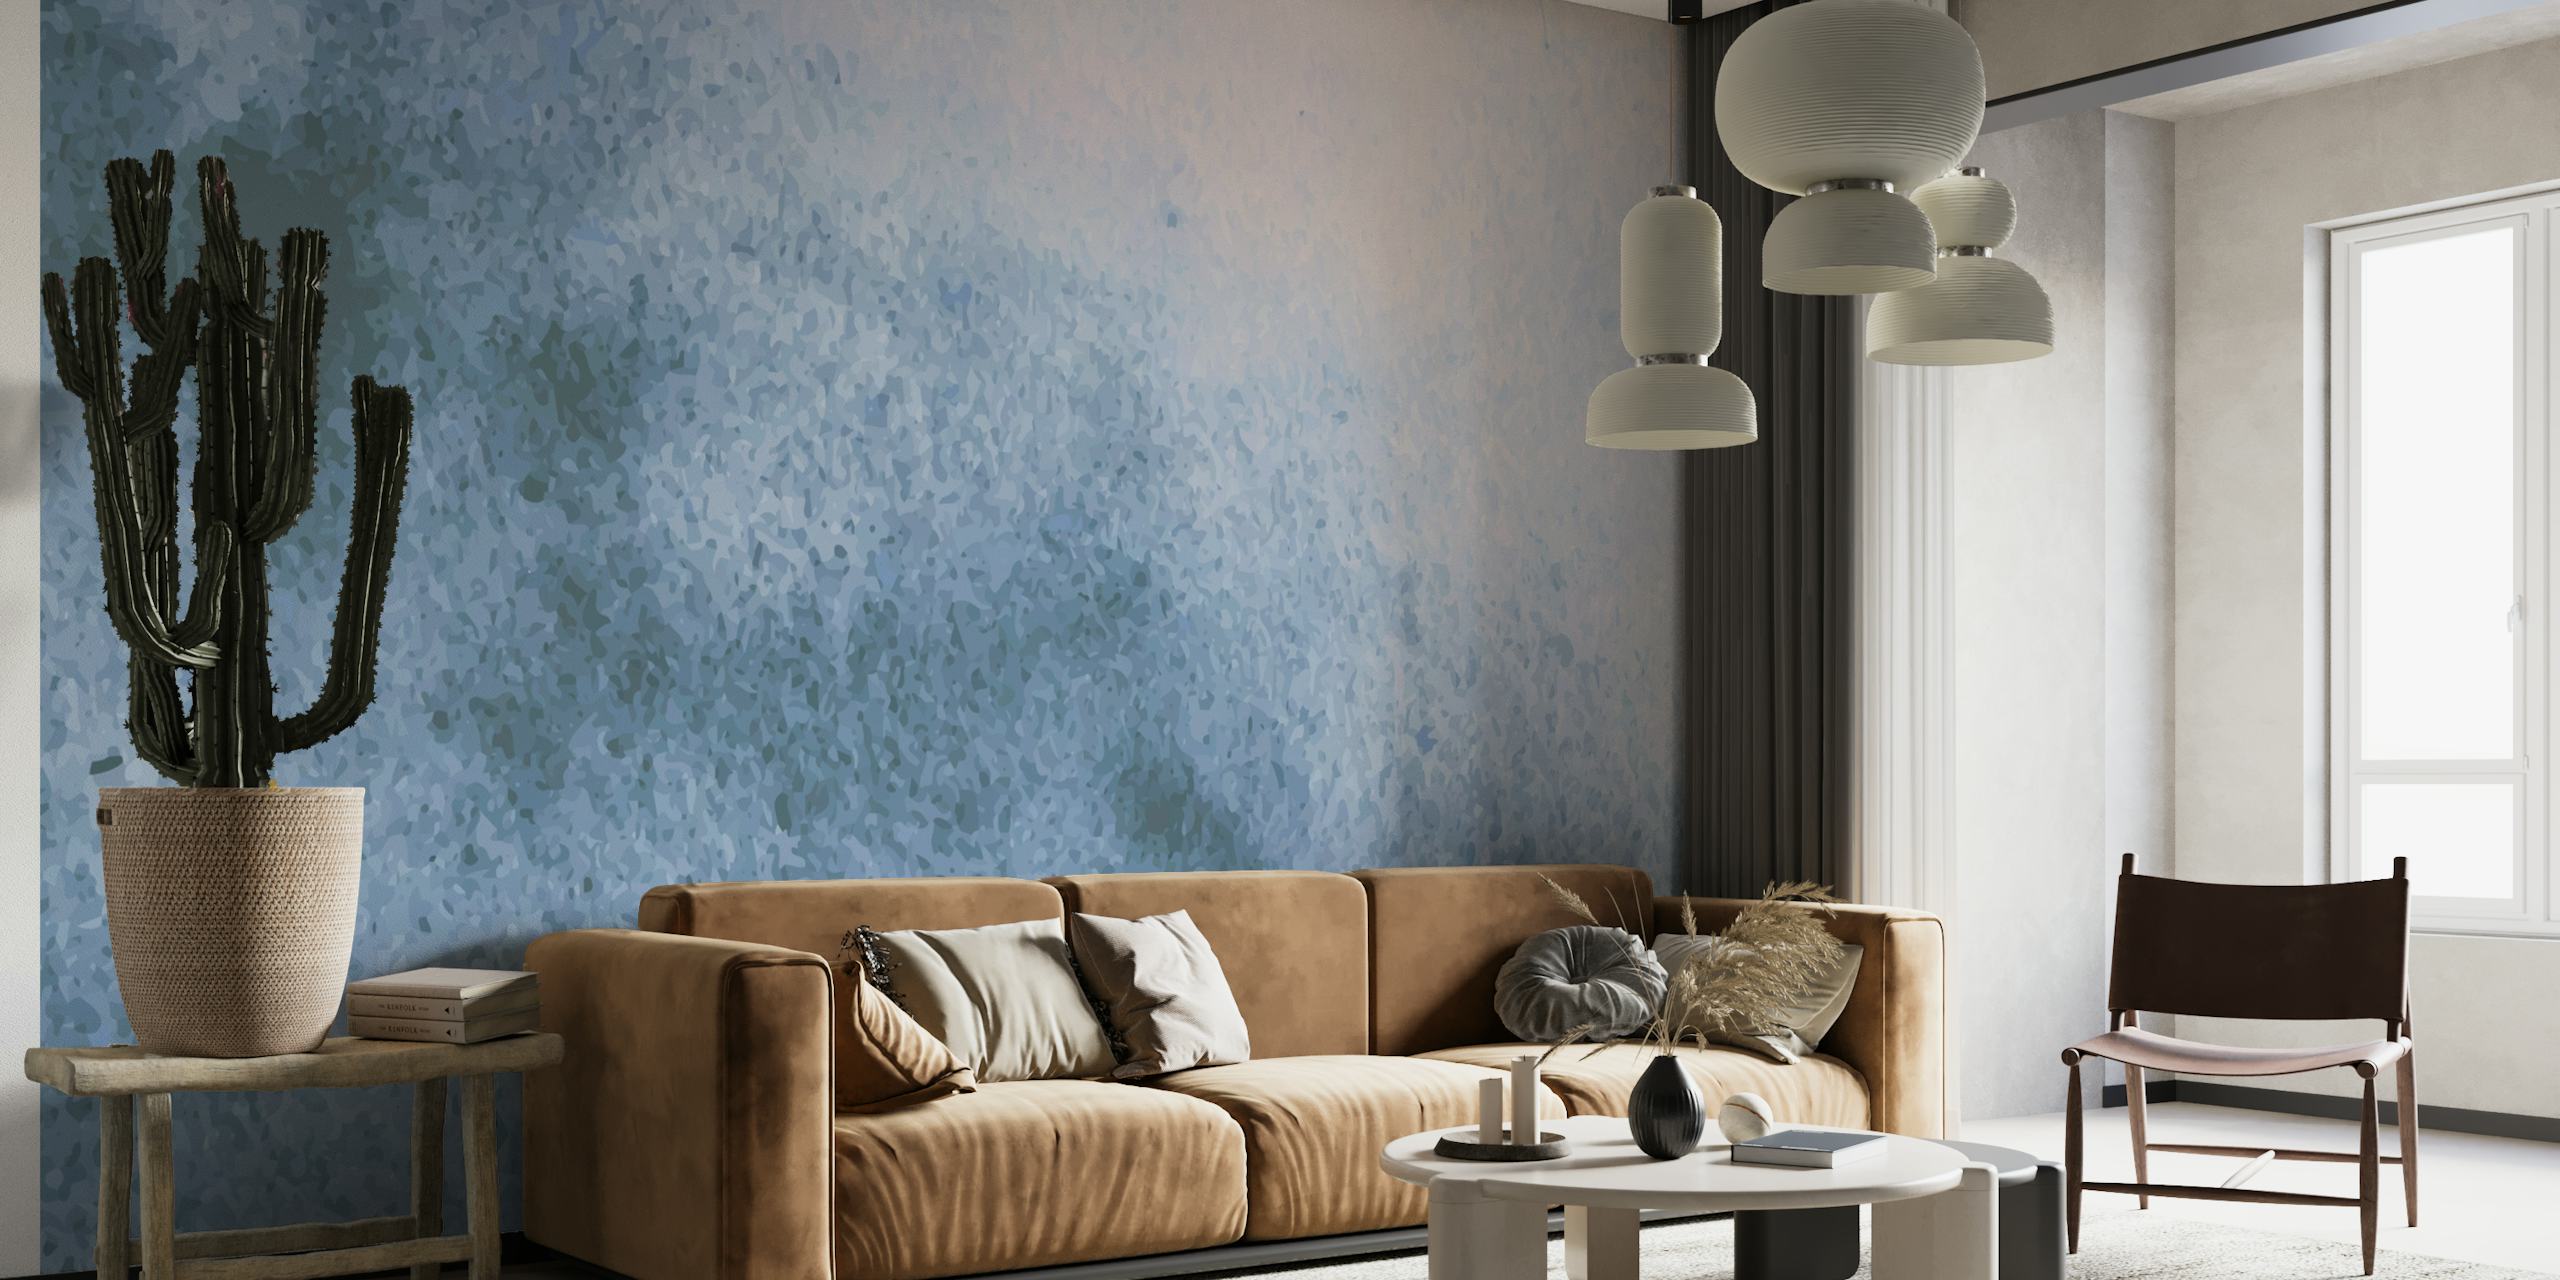 Abstract minimalistic blue and gray watercolor wall mural